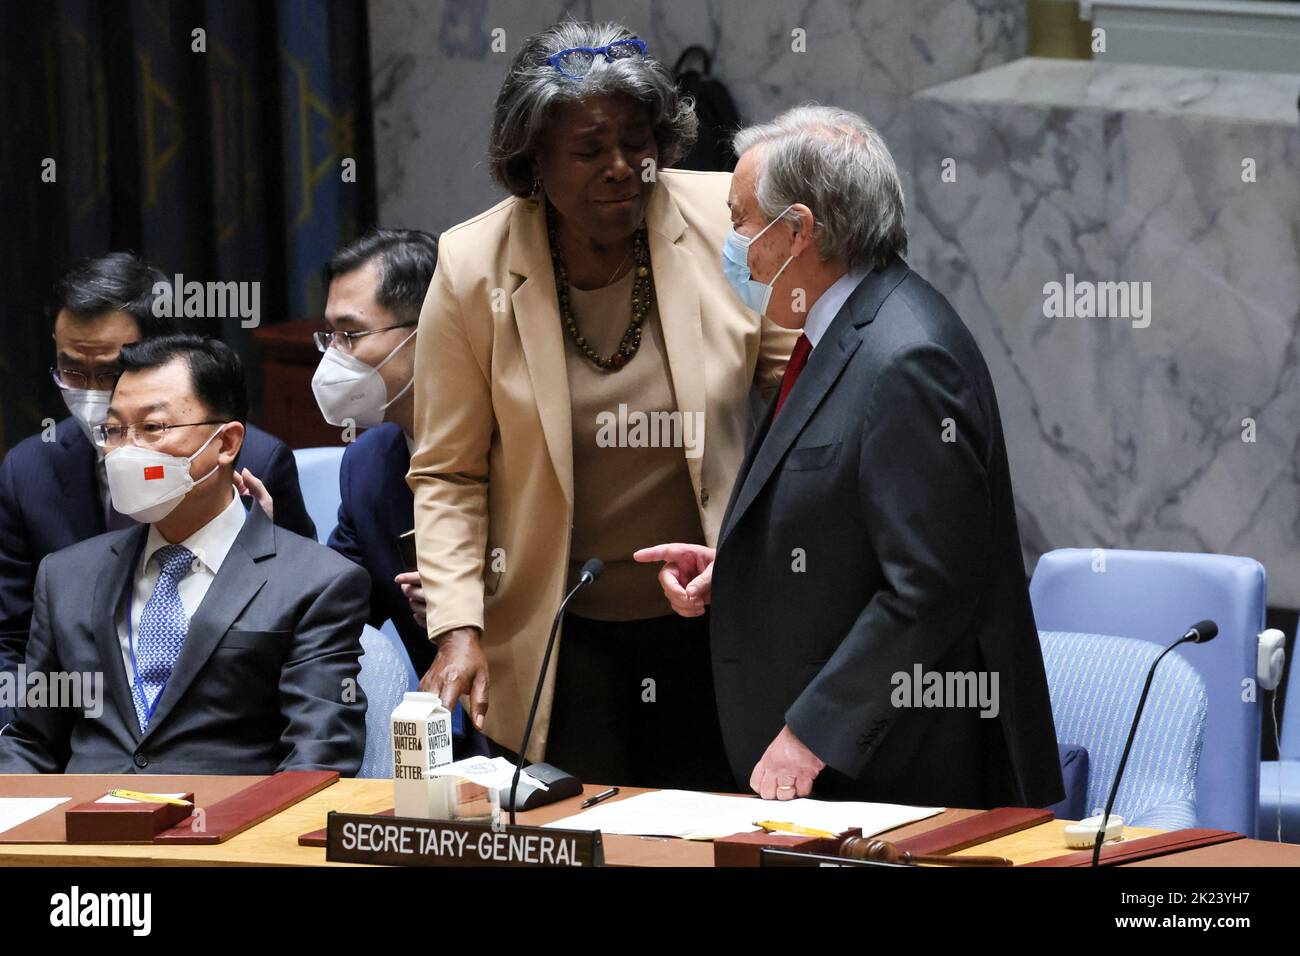 U.S. Ambassador to the UN Linda Thomas-Greenfield and United Nations Secretary General Antonio Guterres attend a high level meeting of the United Nations Security Council on the situation amid Russia's invasion of Ukraine, at the 77th Session of the United Nations General Assembly at U.N. Headquarters in New York City, U.S., September 22, 2022. REUTERS/Brendan McDermid Stock Photo